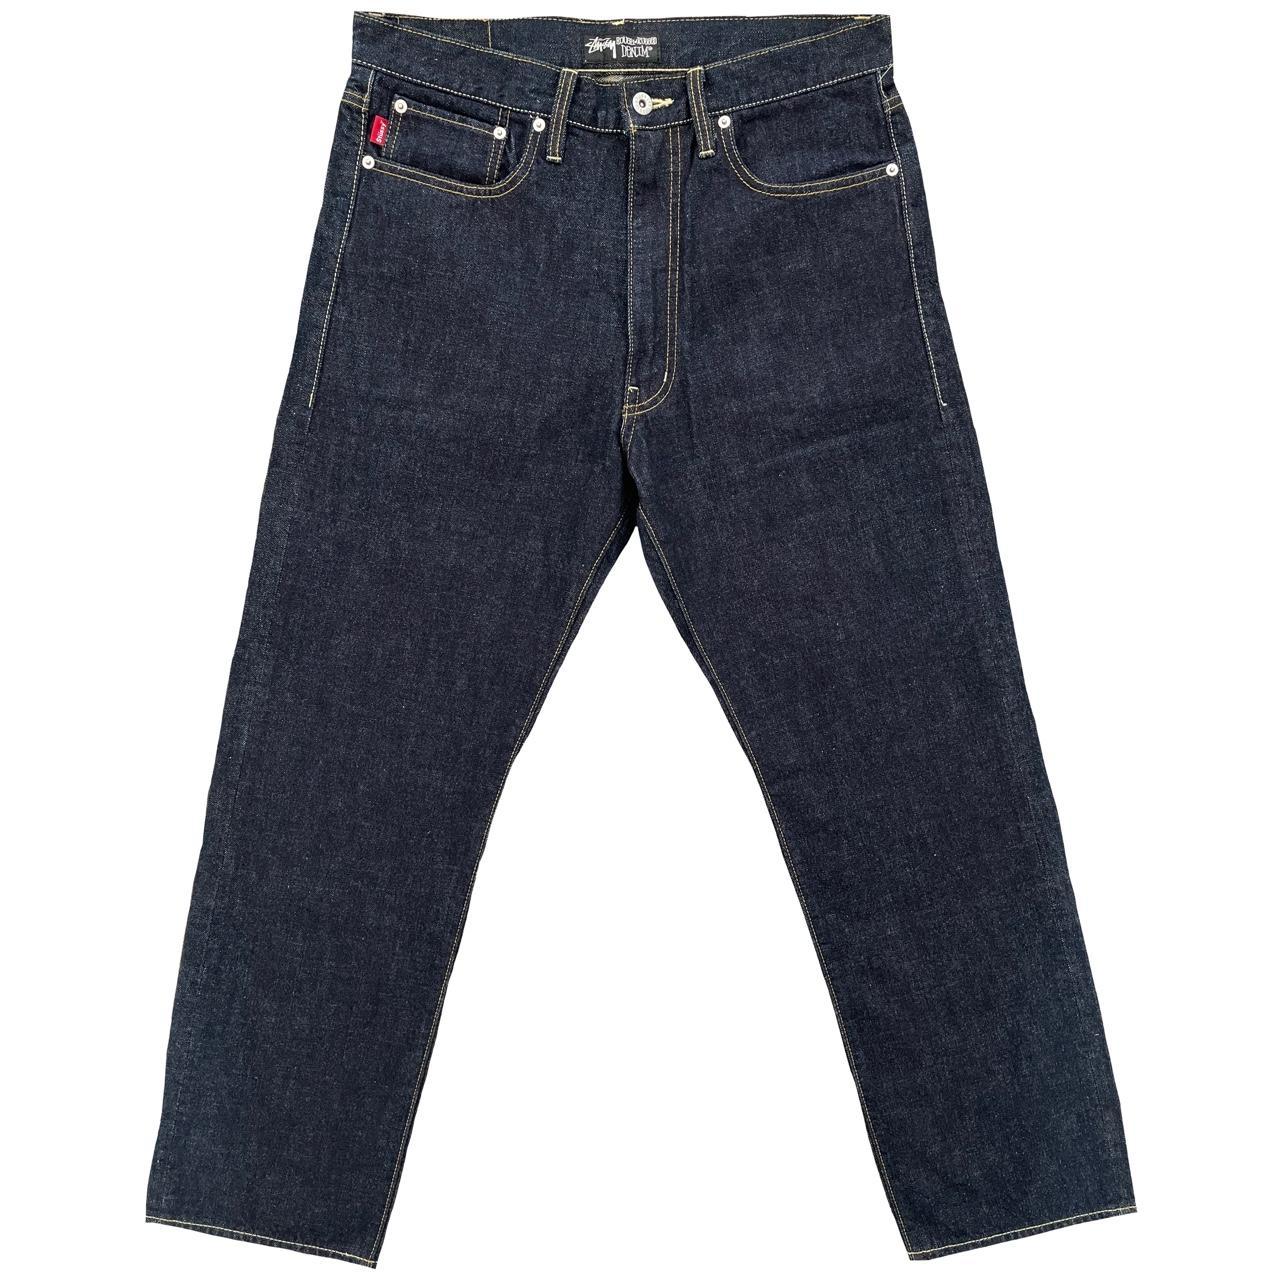 Stussy Spellout Jeans